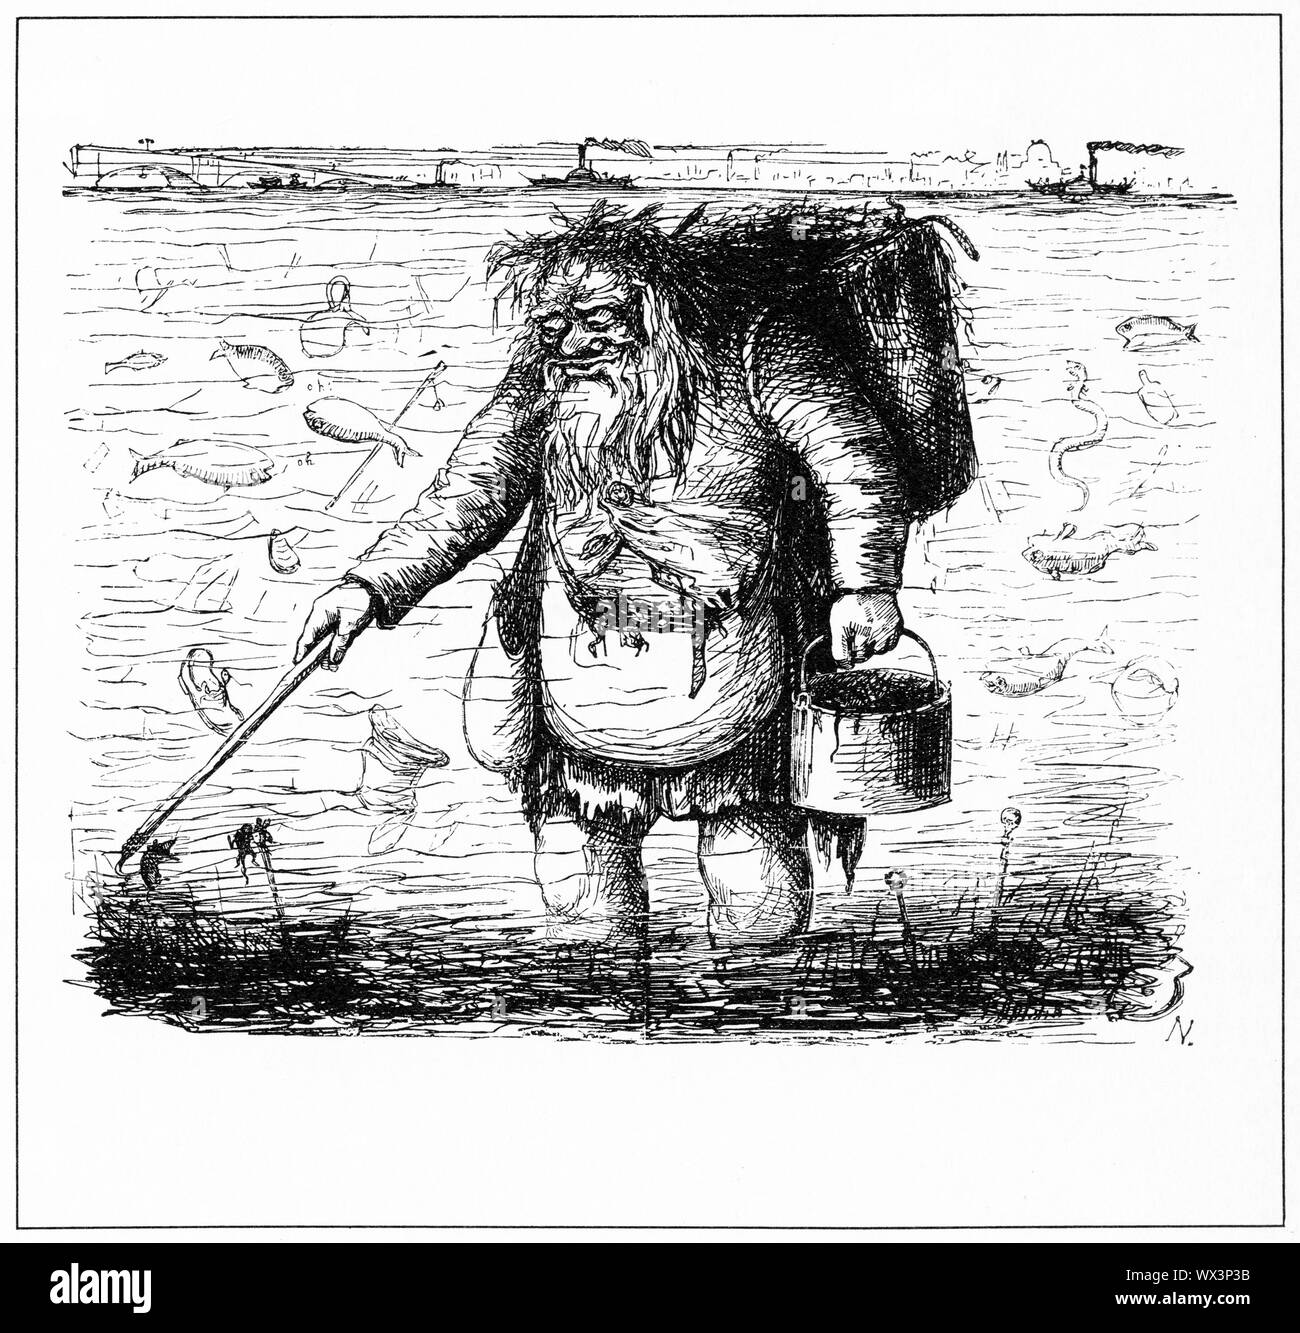 Engraving of Old Father Thames vainly trying to clean up the mess in the Thames River in London. From Punch magazine. Stock Photo